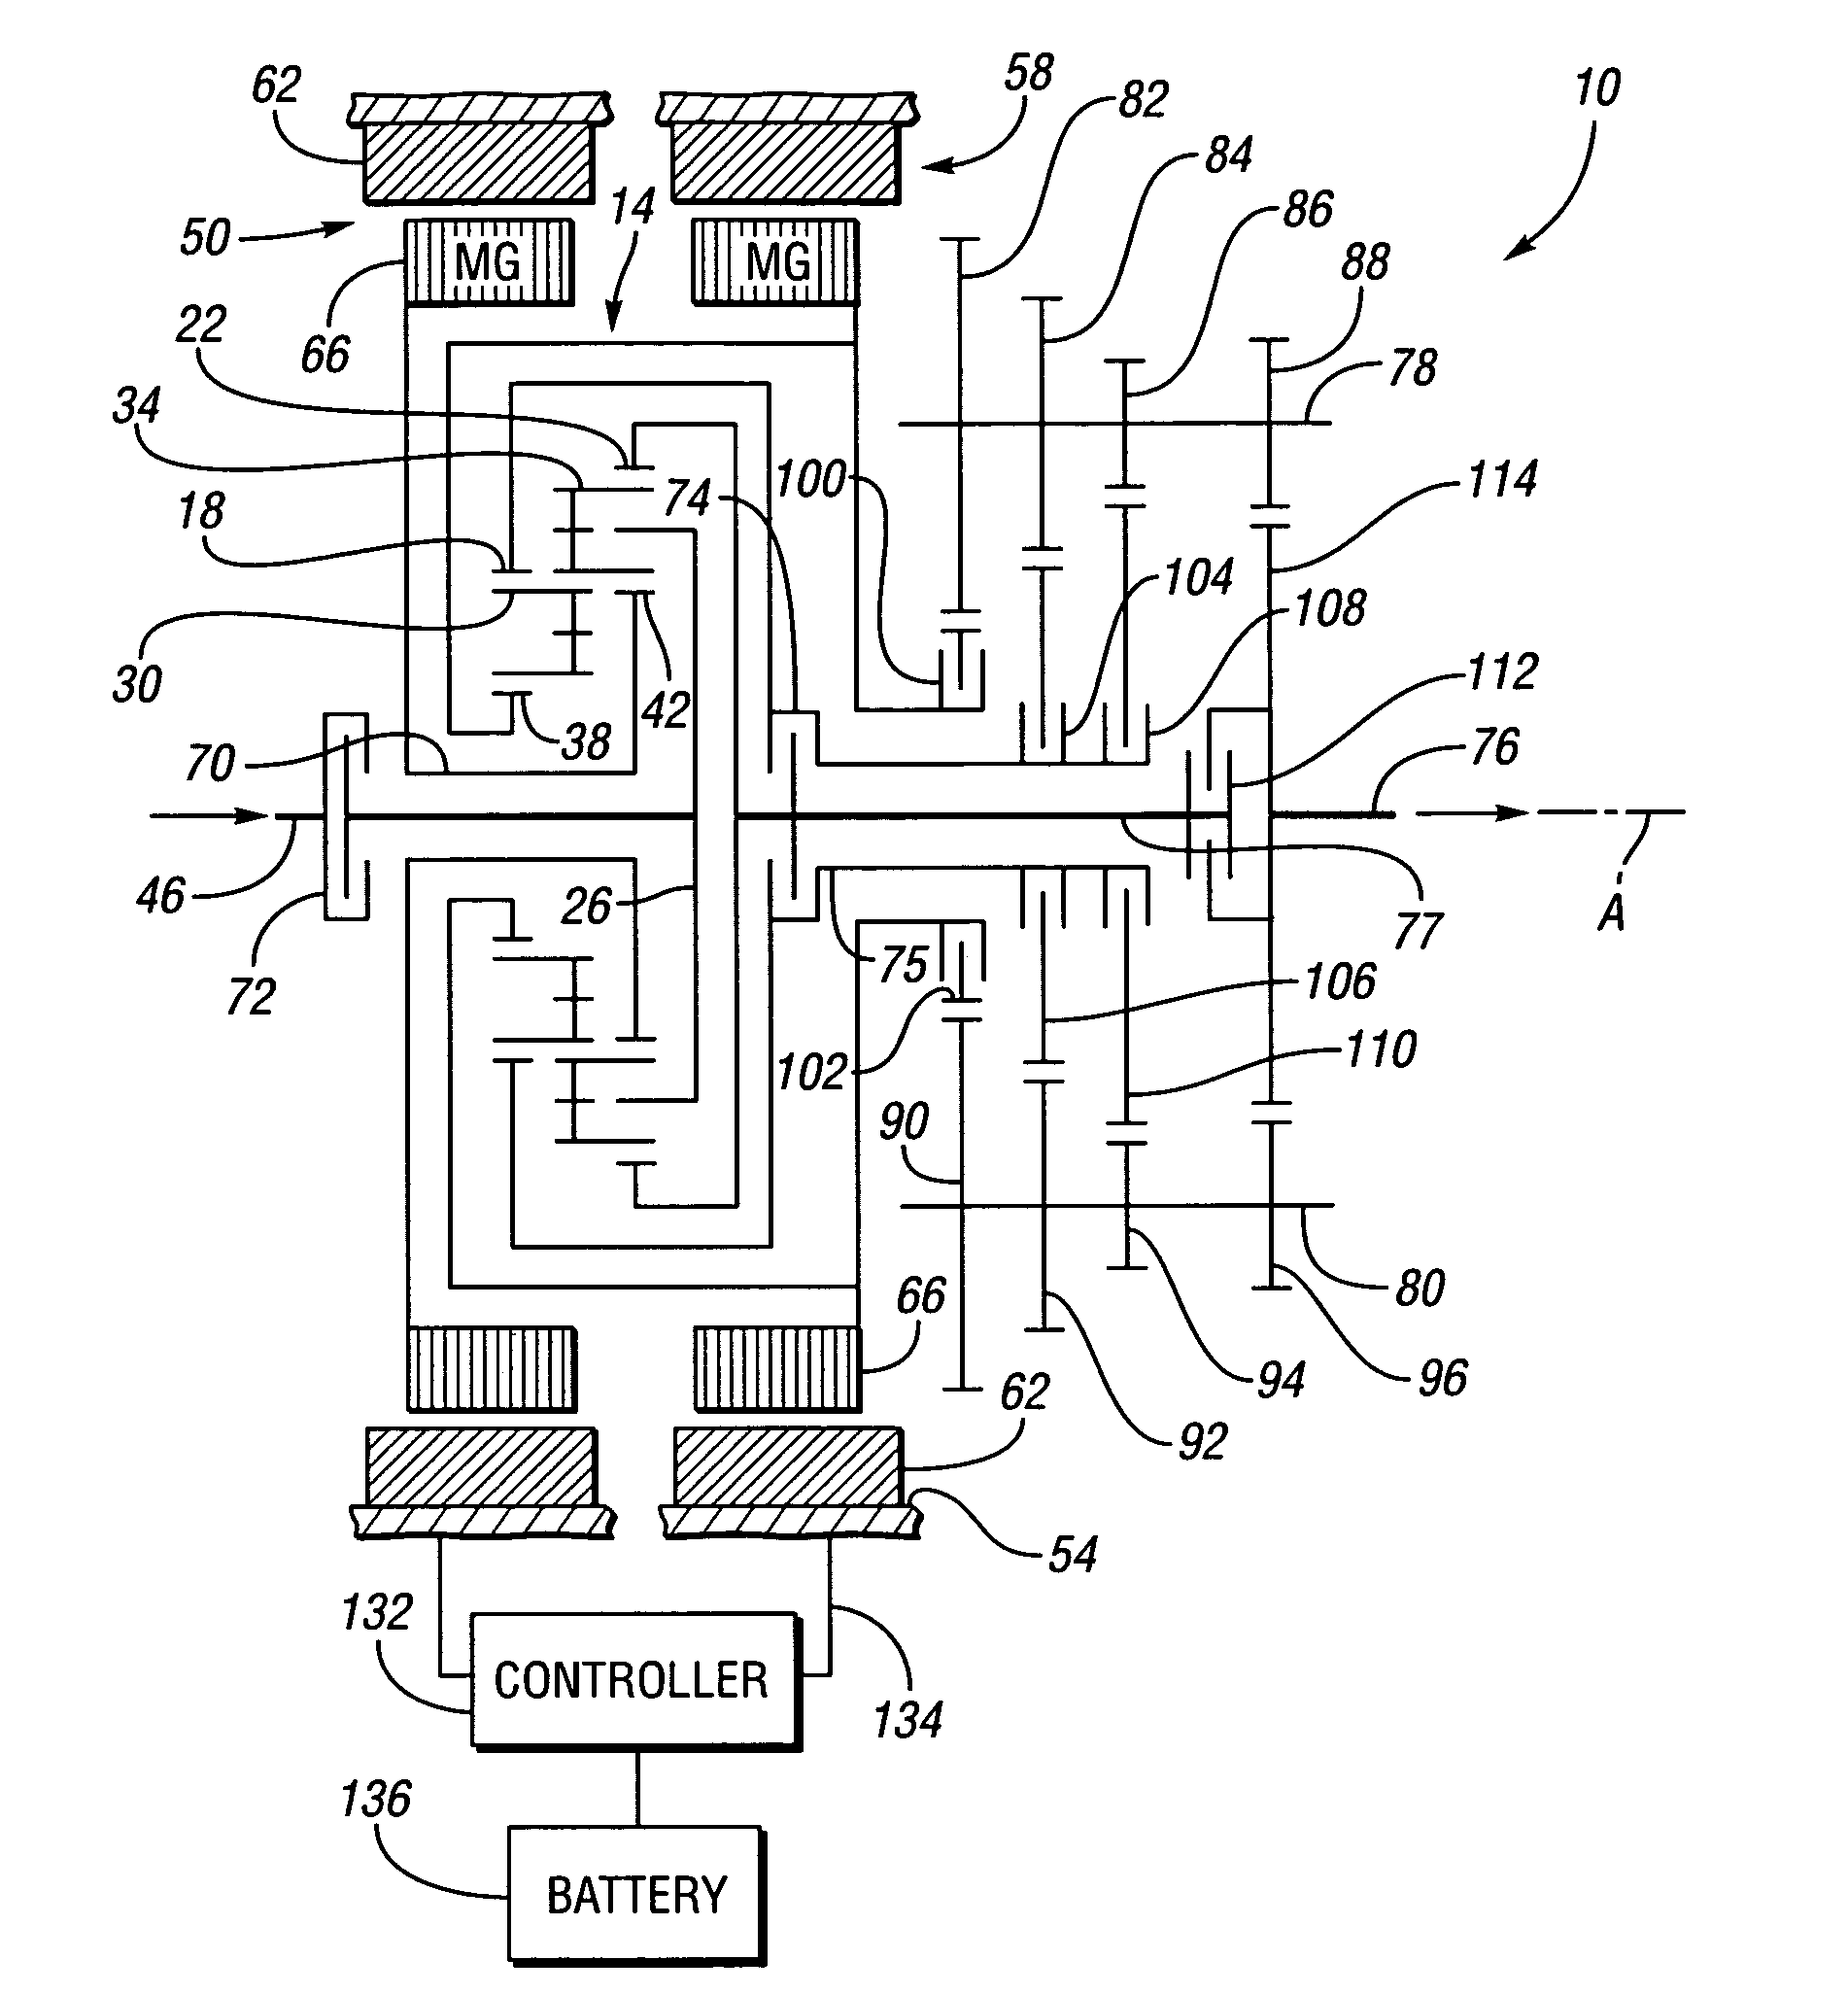 Electrically variable transmission with input split mode and compound split modes